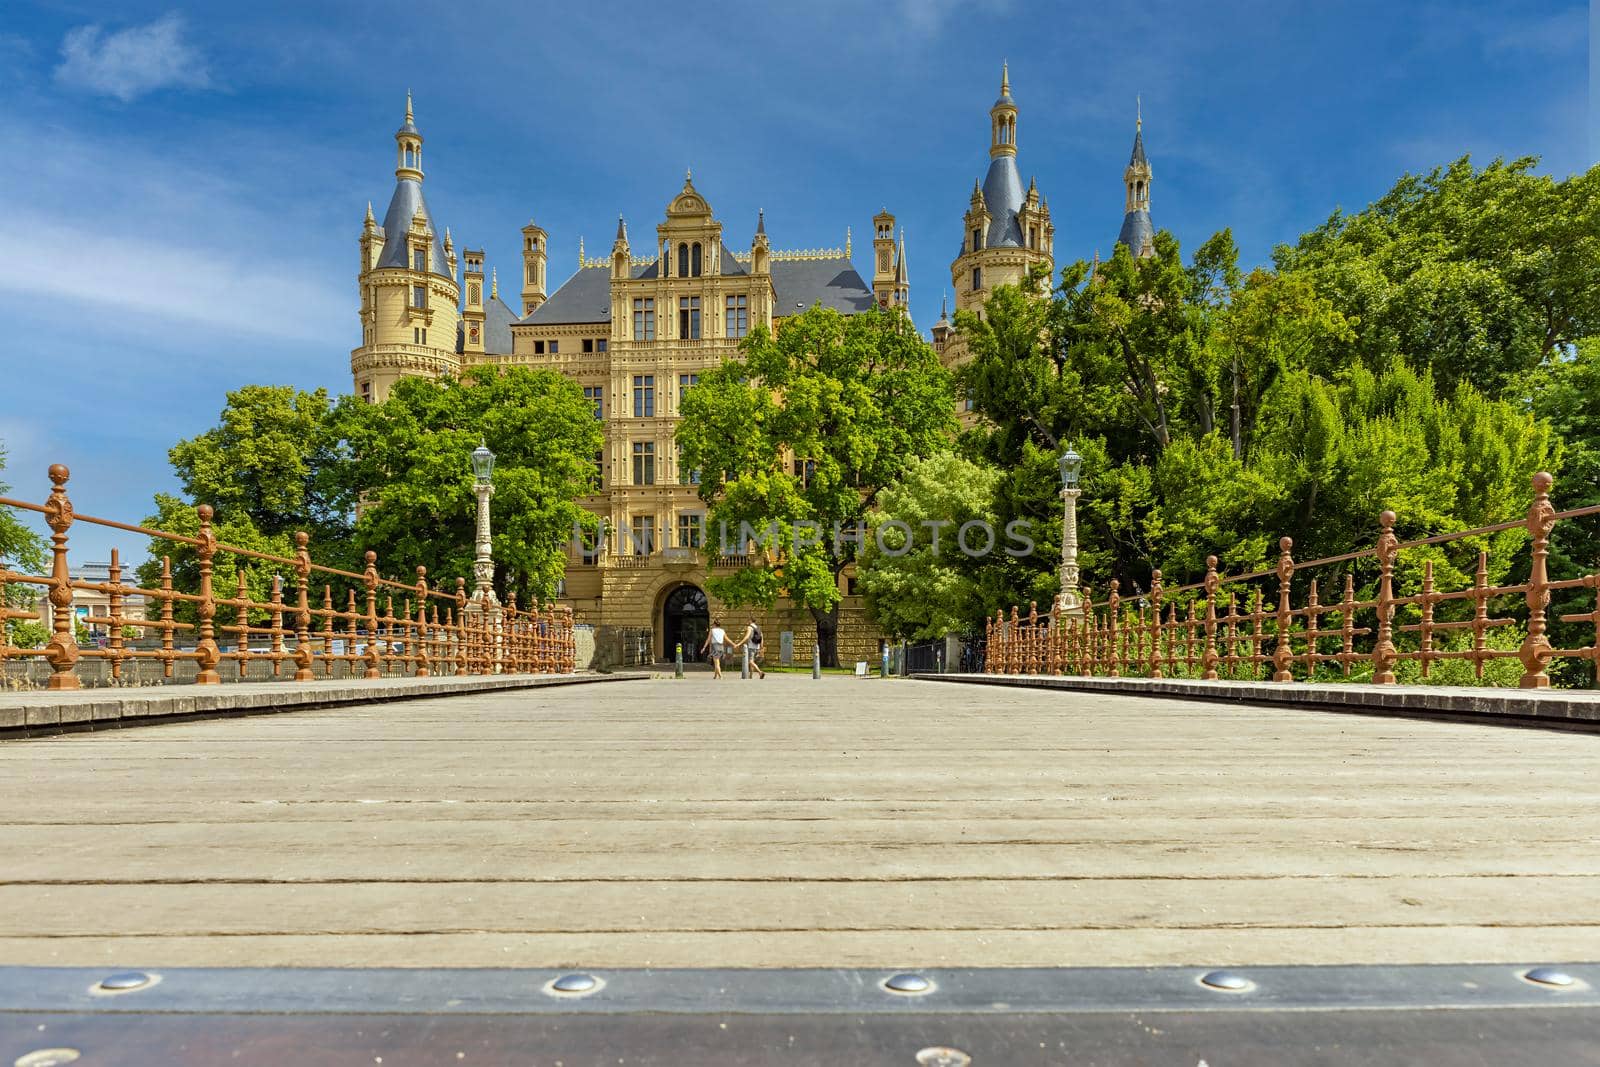 Schwerin Palace, in the city of Schwerin the capital of Mecklenburg-Vorpommern, Germany 